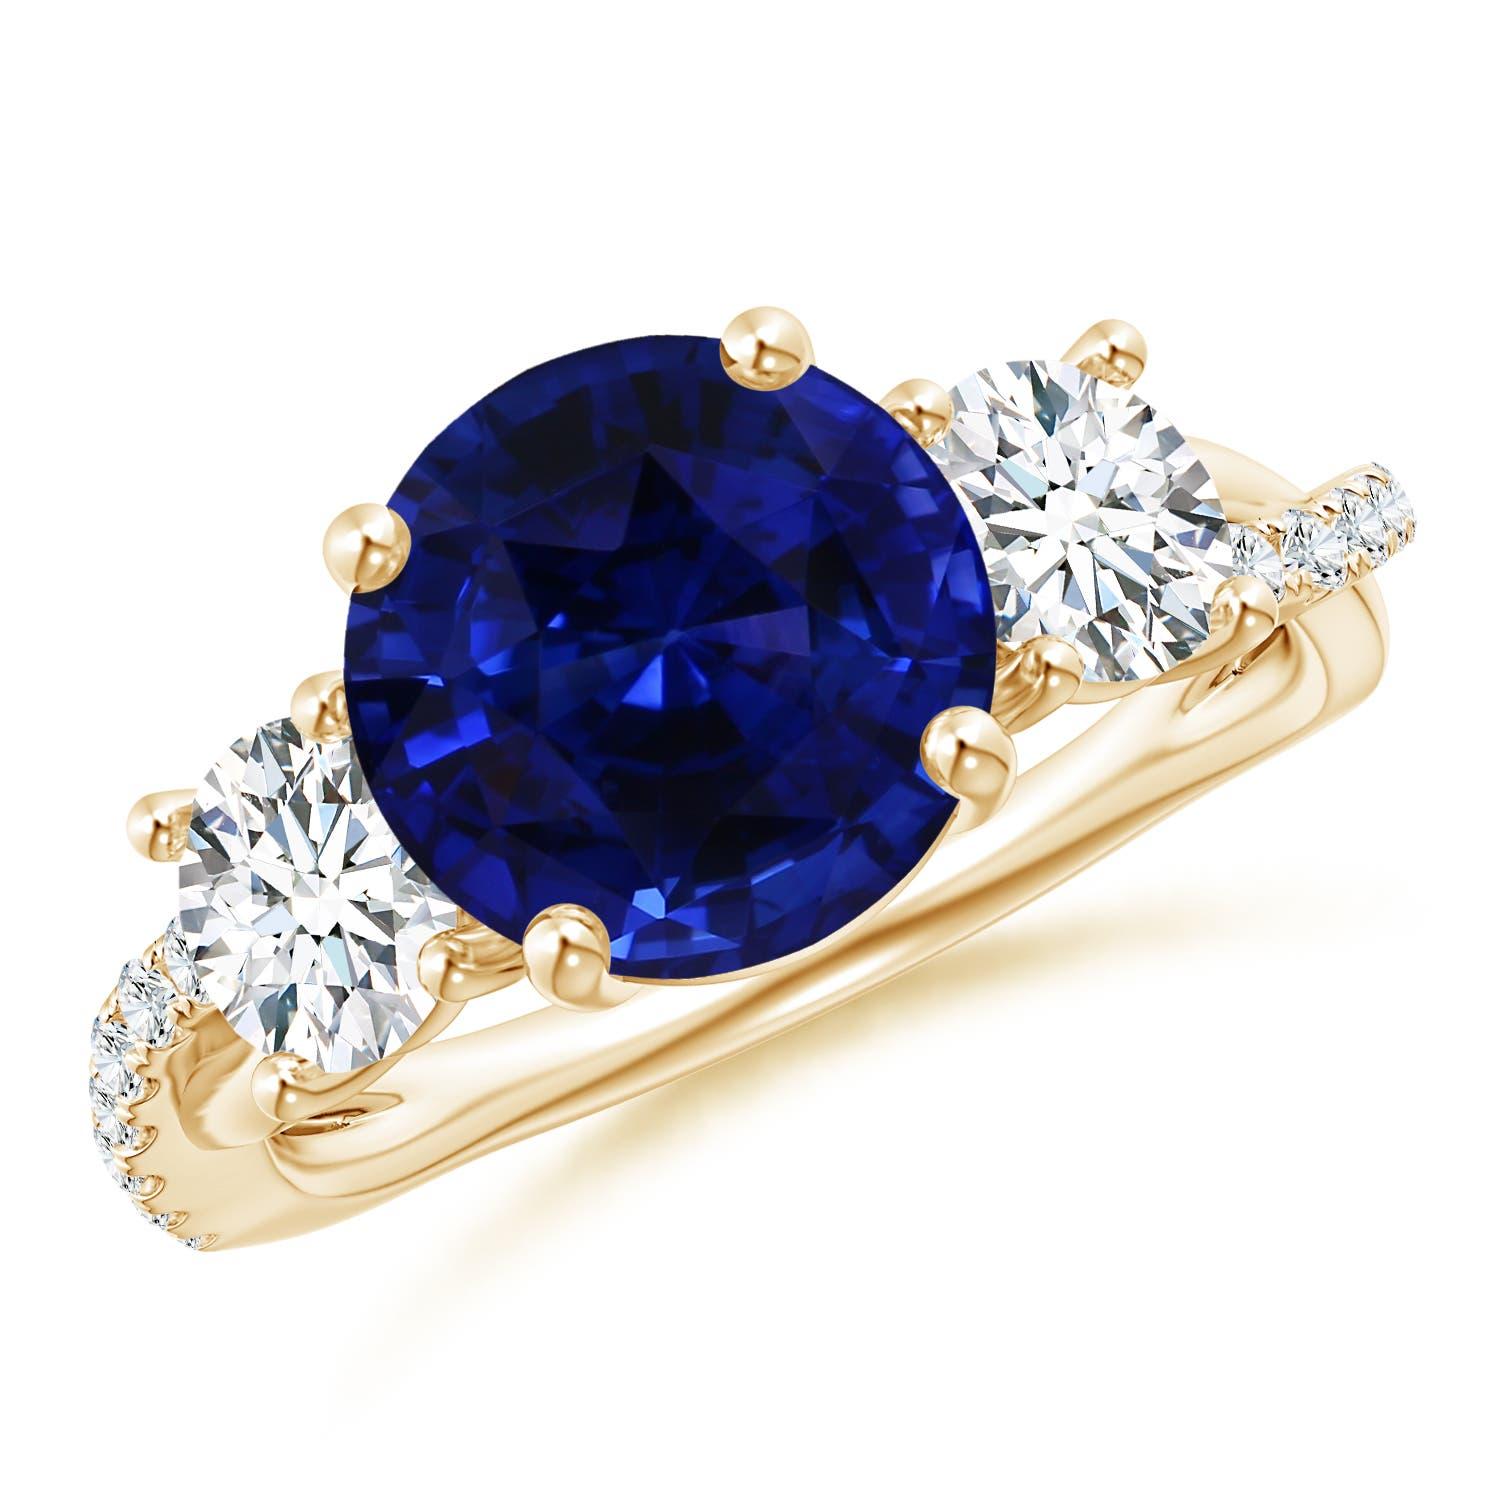 For Sale:  GIA Certified Natural Blue Sapphire Ring in Yellow Gold with Diamonds